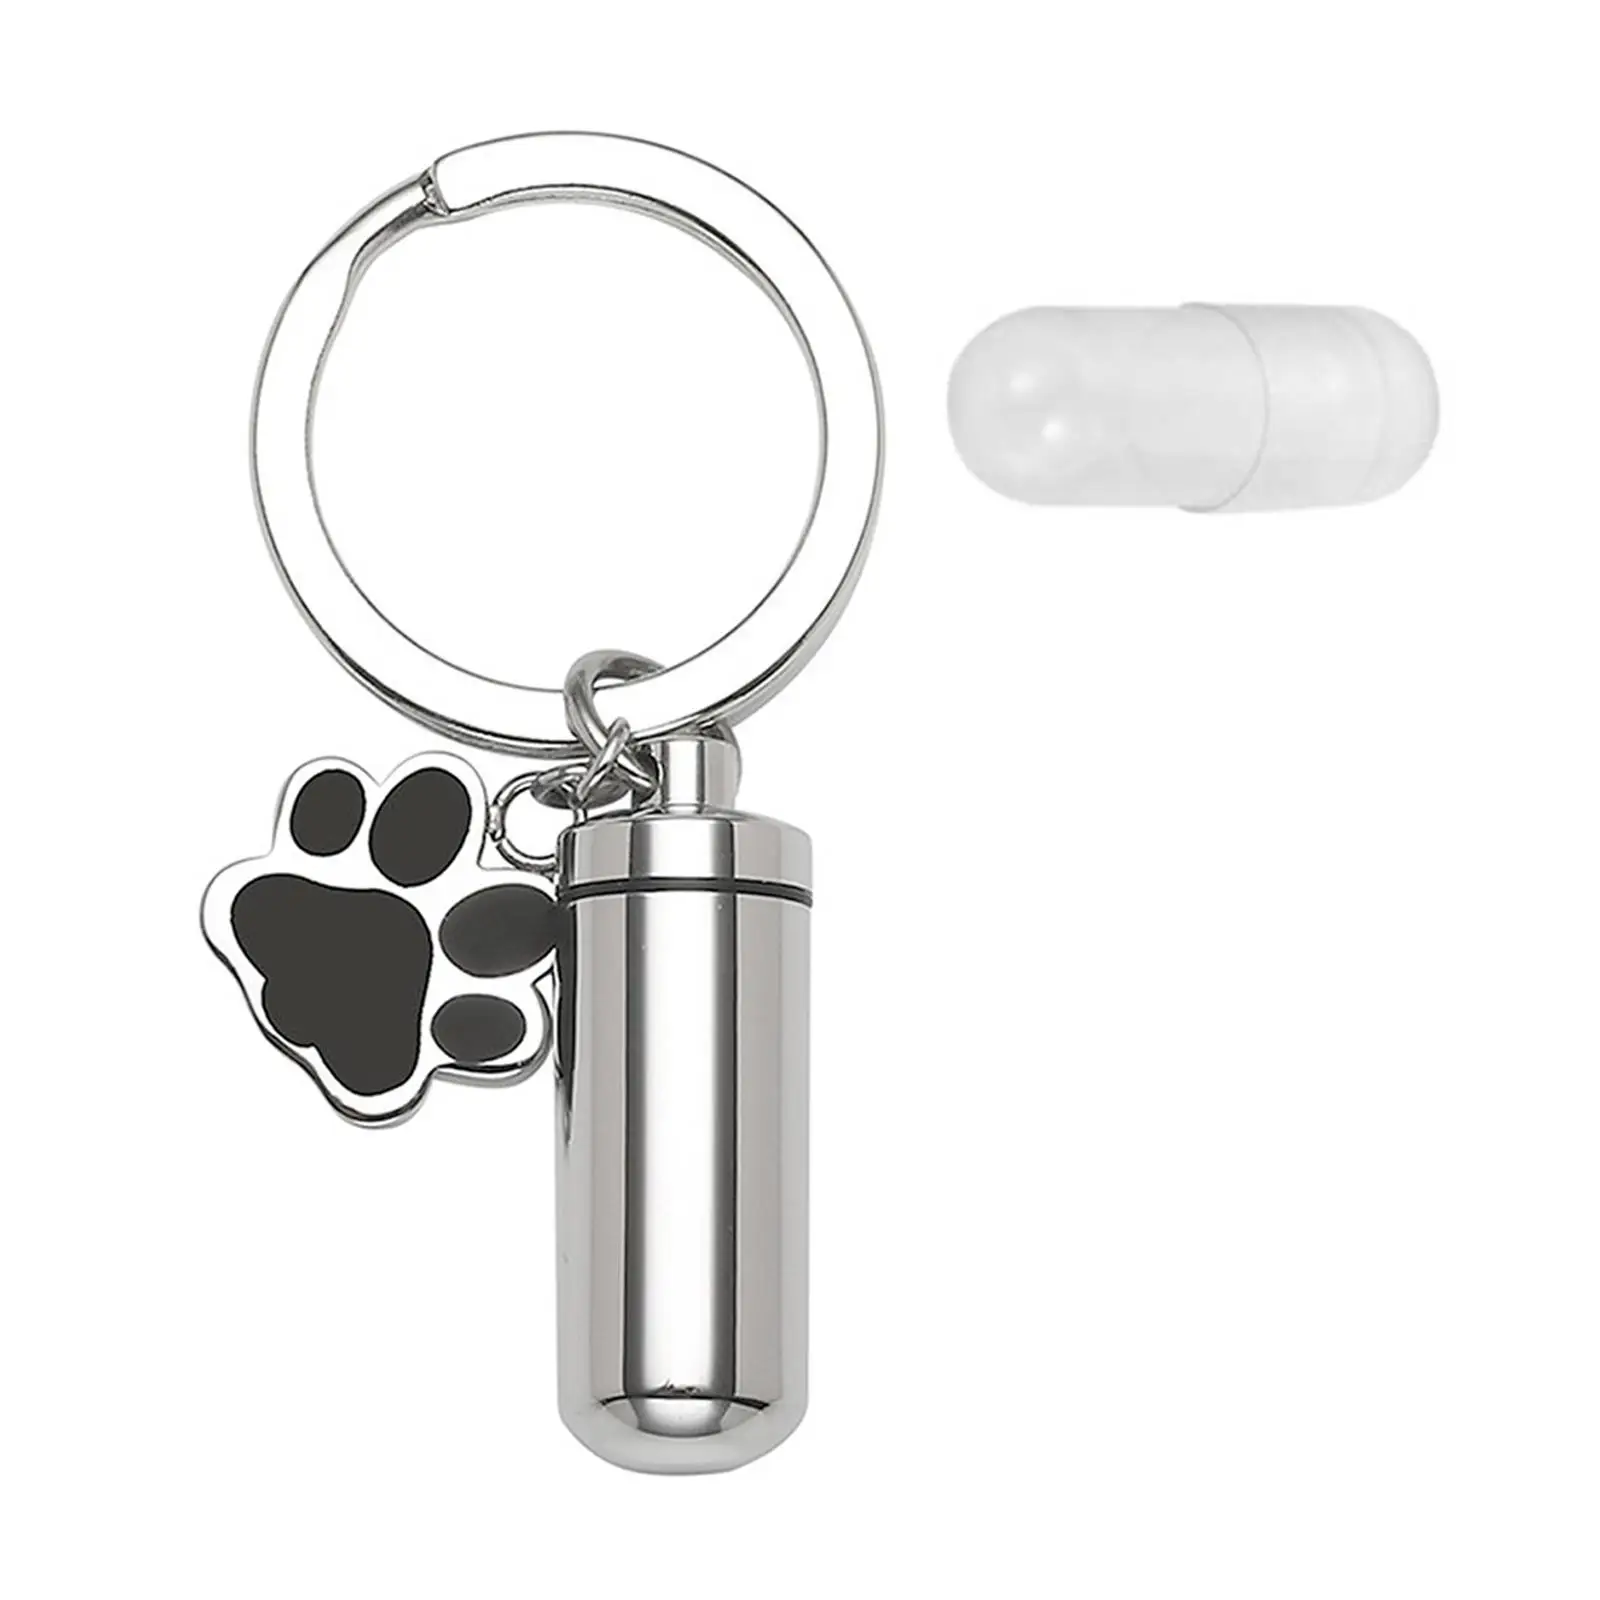 Pet Urn Easy to Use Peace and Comfort Services Pet Supplies with A Paw Pendant Memorable Dog Ash Urns for Dogs and Cats Ashes